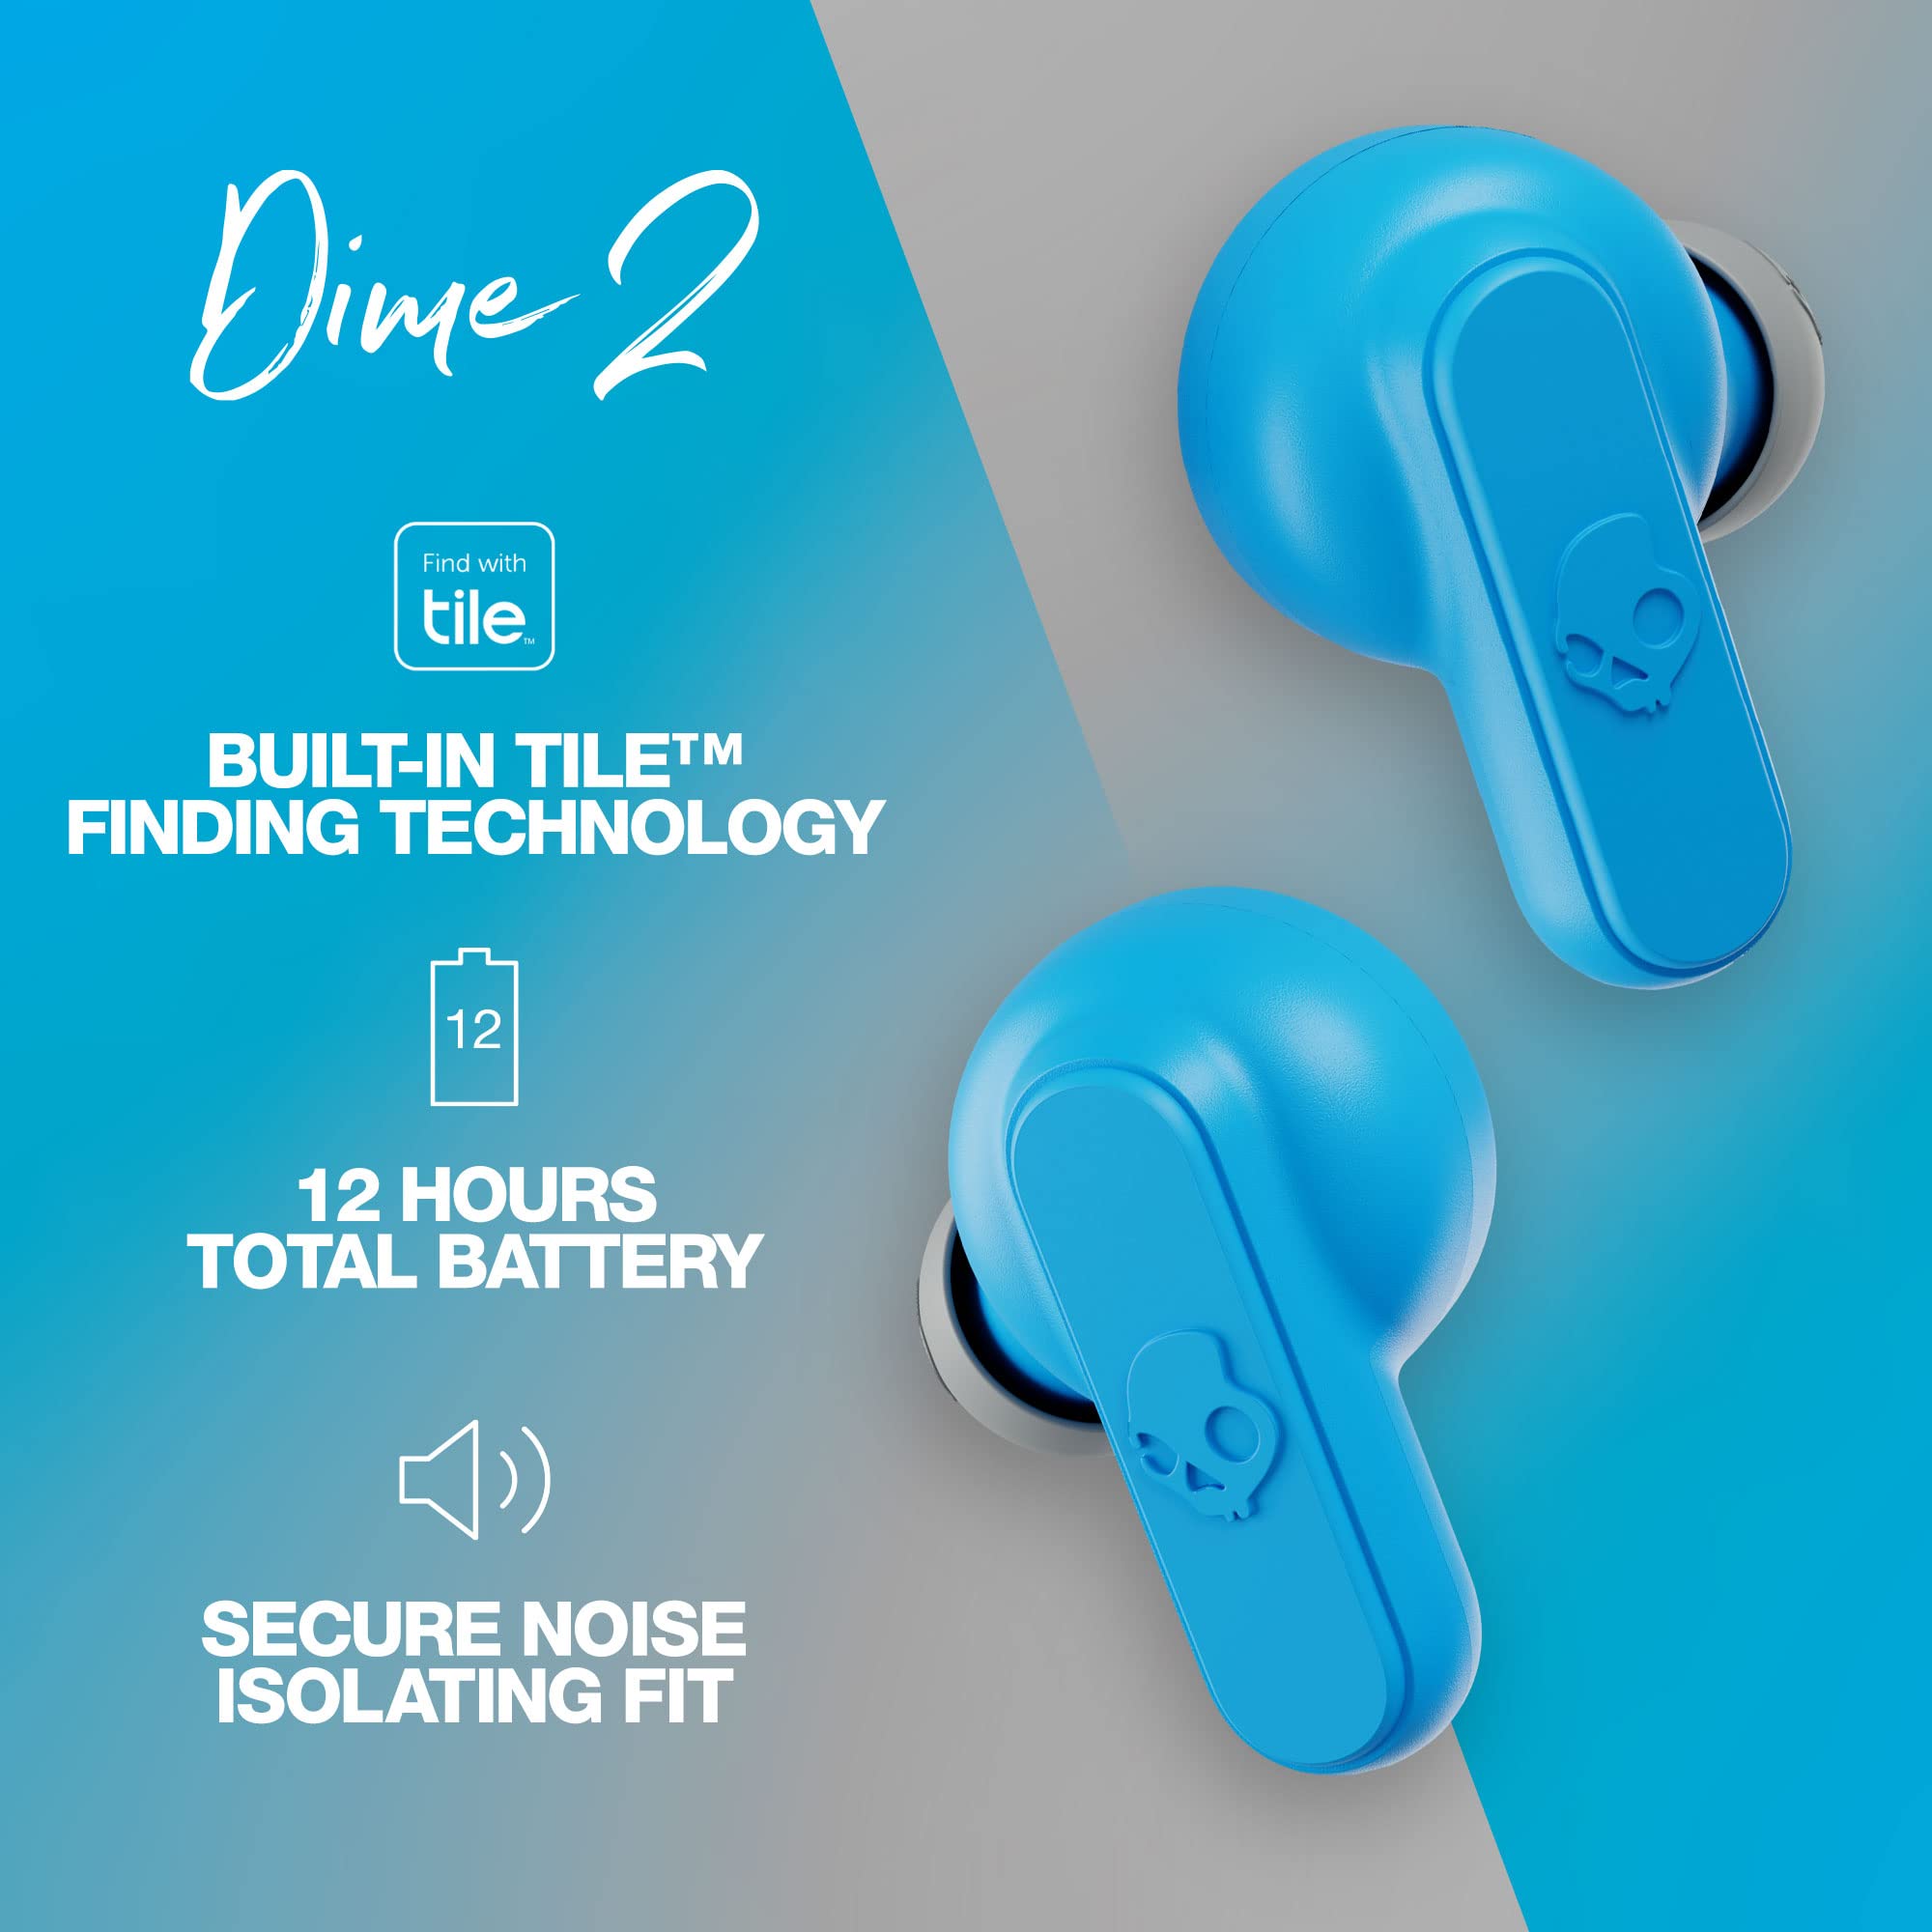 Skullcandy Dime 2 True Wireless In-Ear Bluetooth Earbuds, Use with iPhone and Android. Charging Case, Tile, and Microphone. Best for Gym, Sports, and Gaming, IPX4 Sweat and Dust Resistant - Grey/Blue